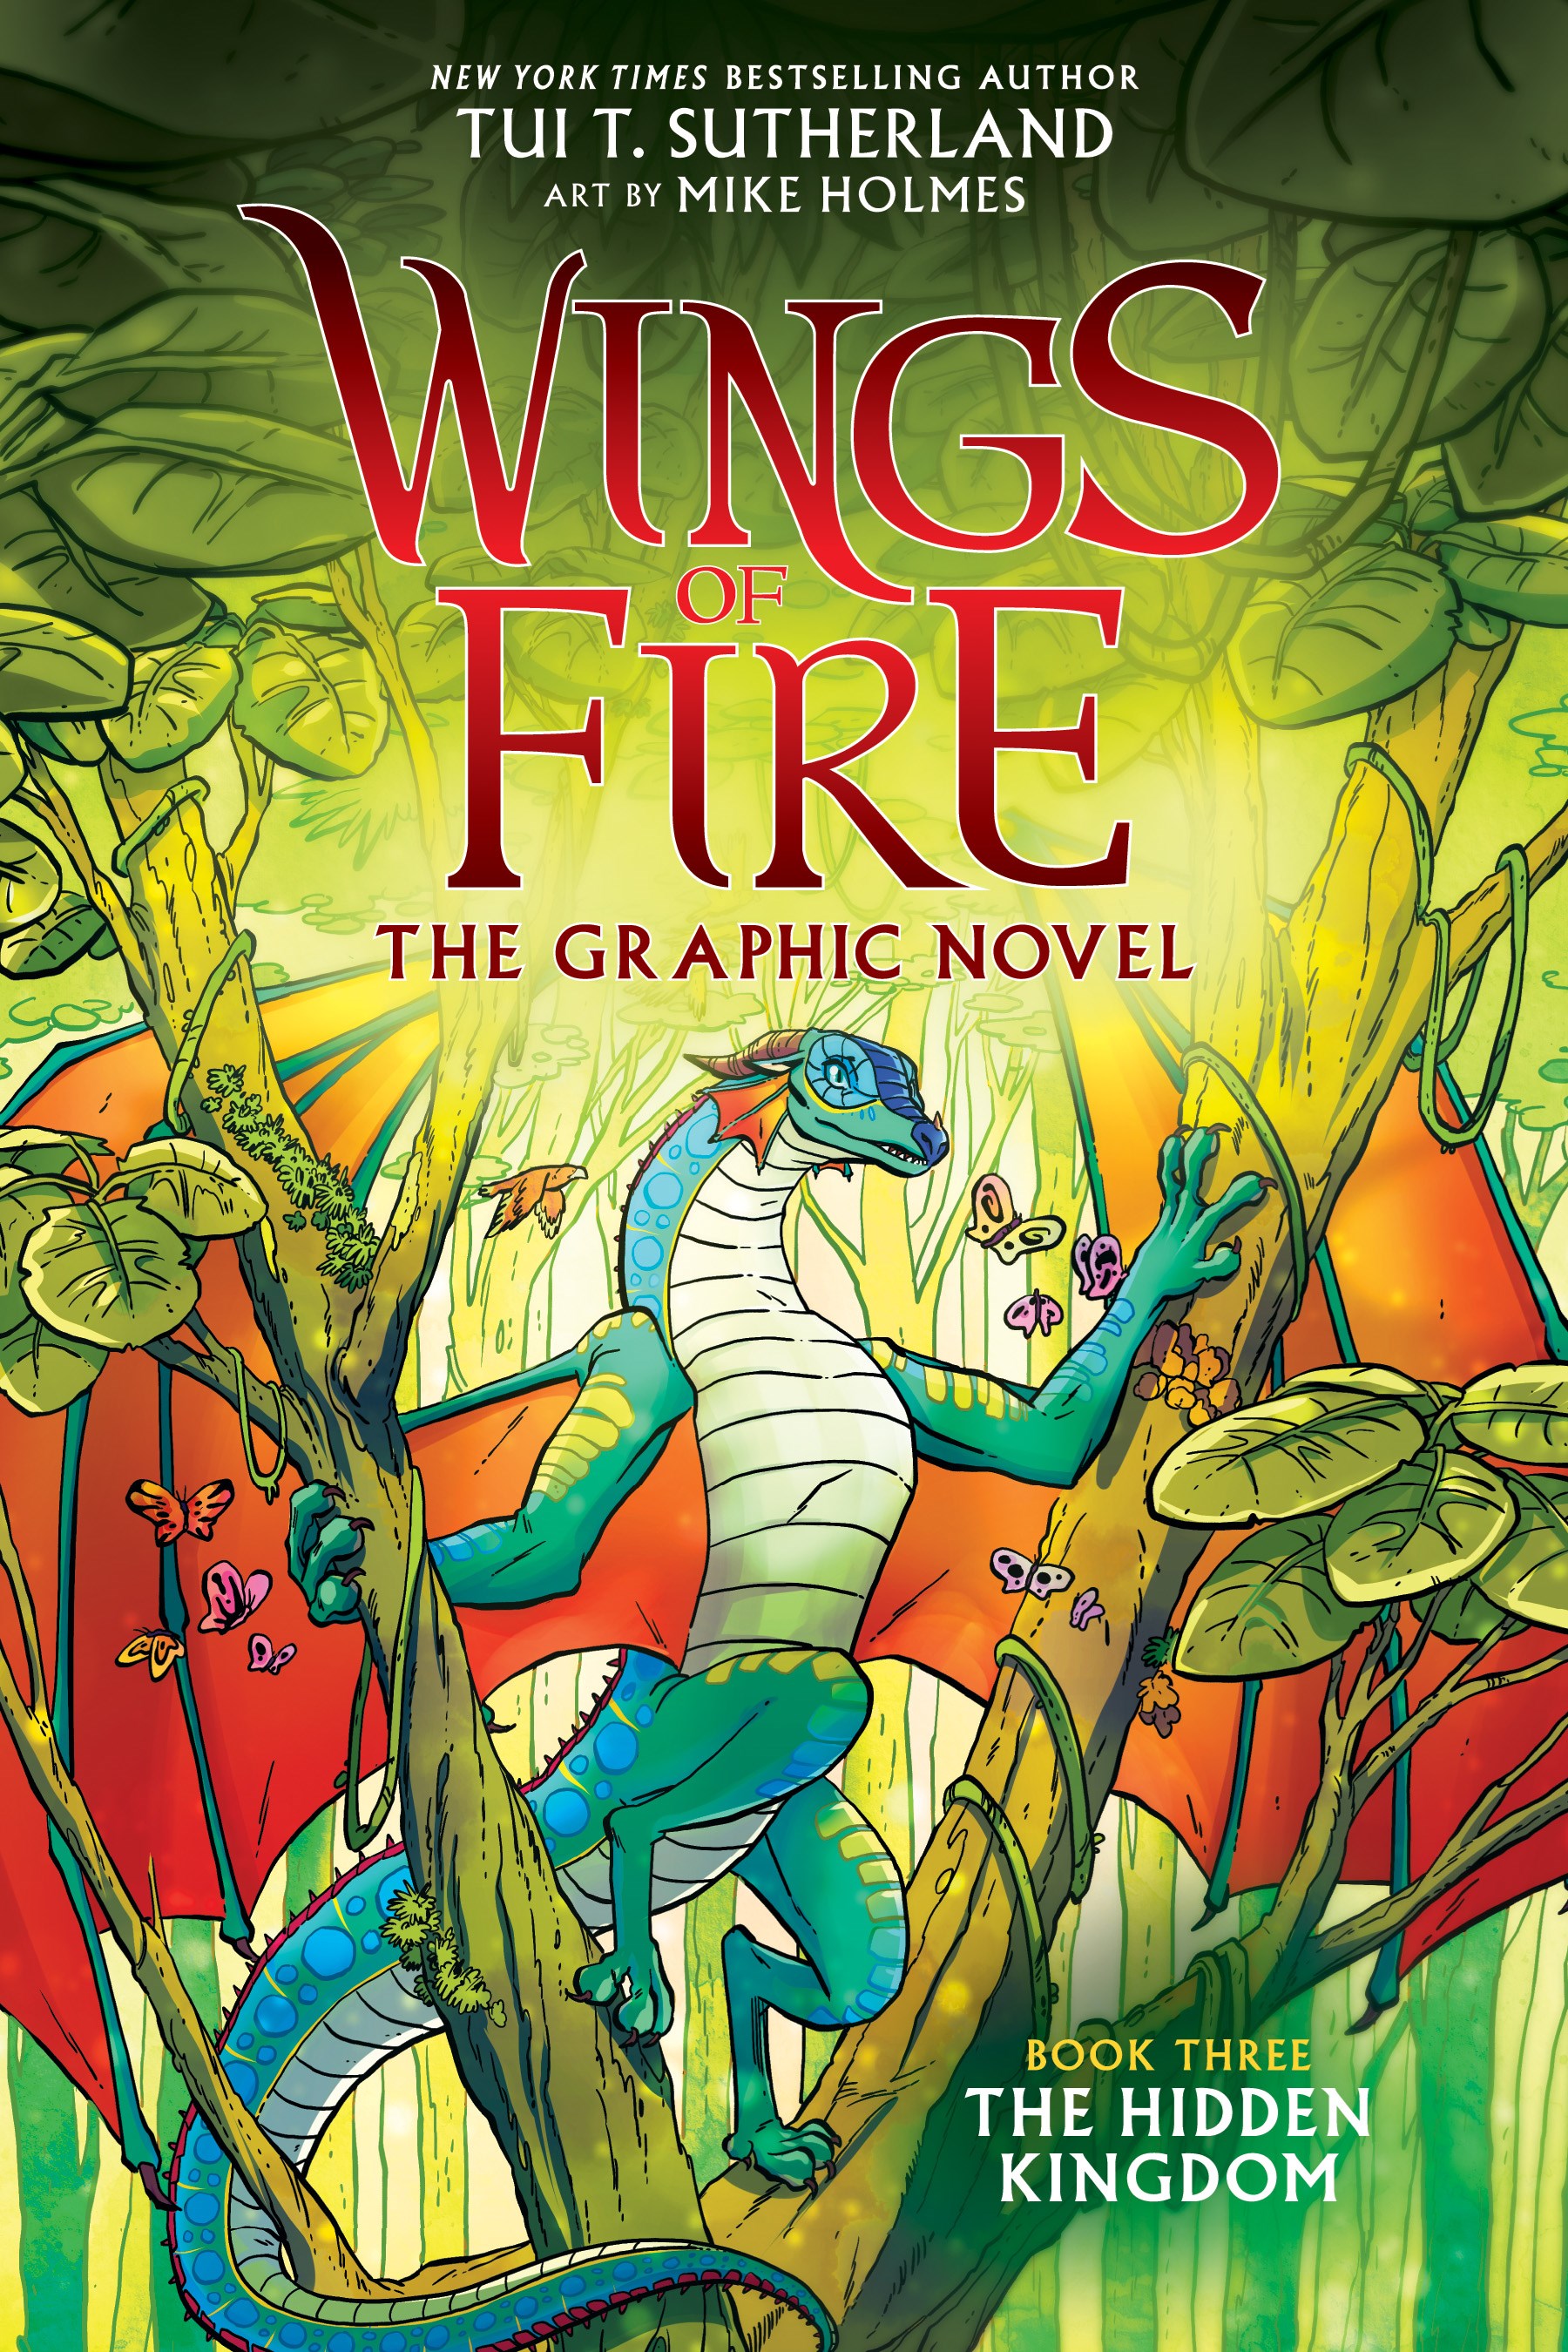 theme of wings of fire